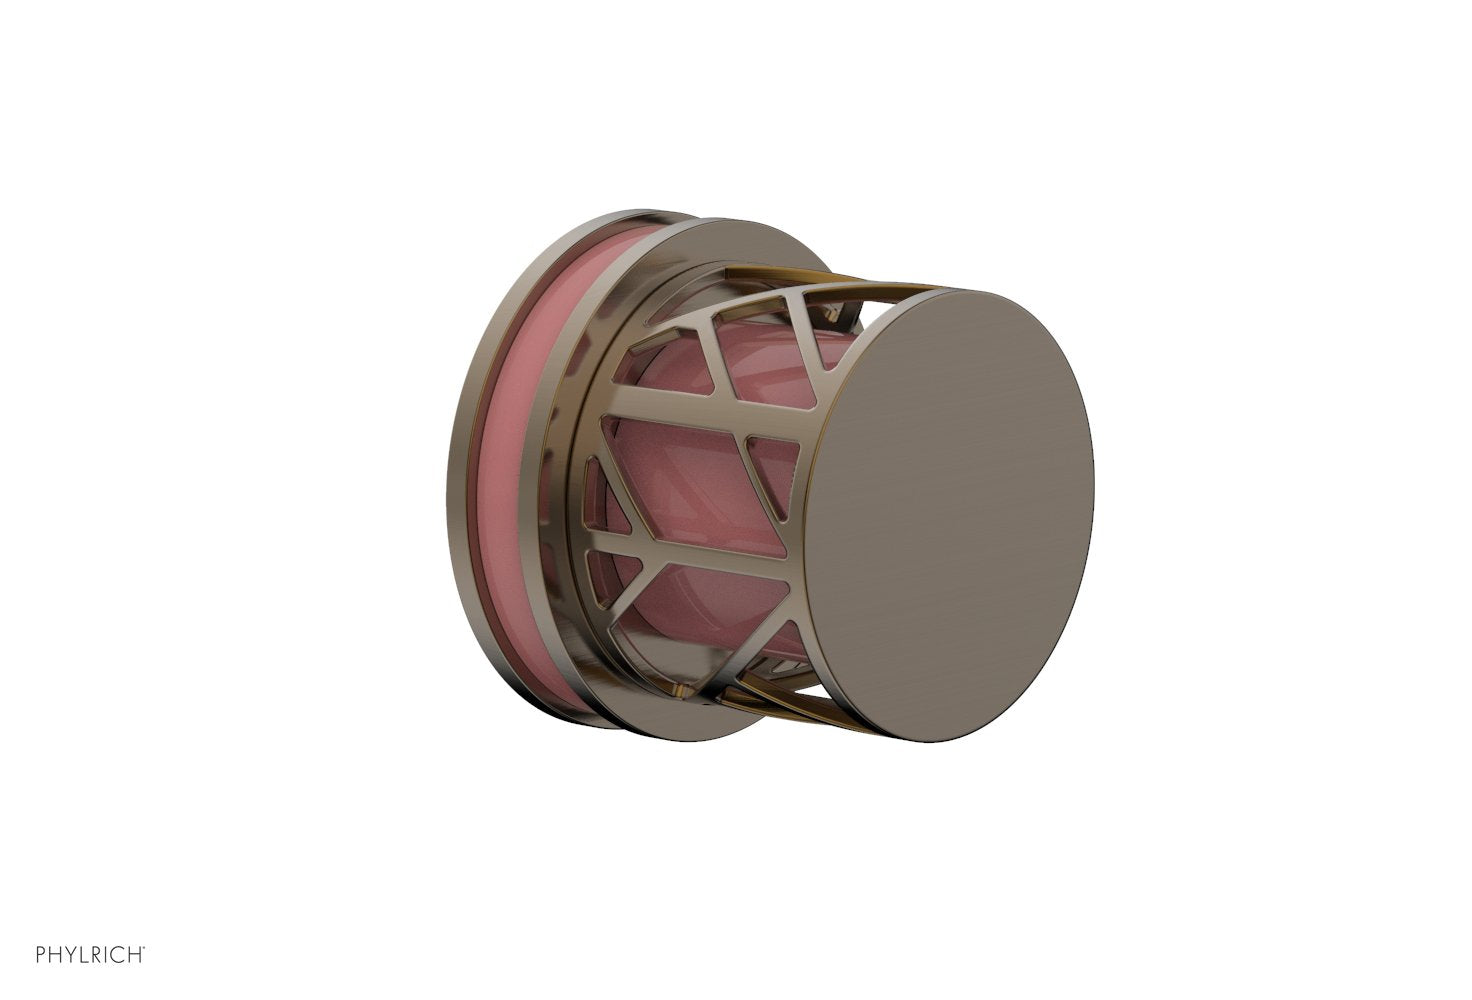 Phylrich JOLIE Volume Control/Diverter Trim - Round Handle with "Pink" Accents